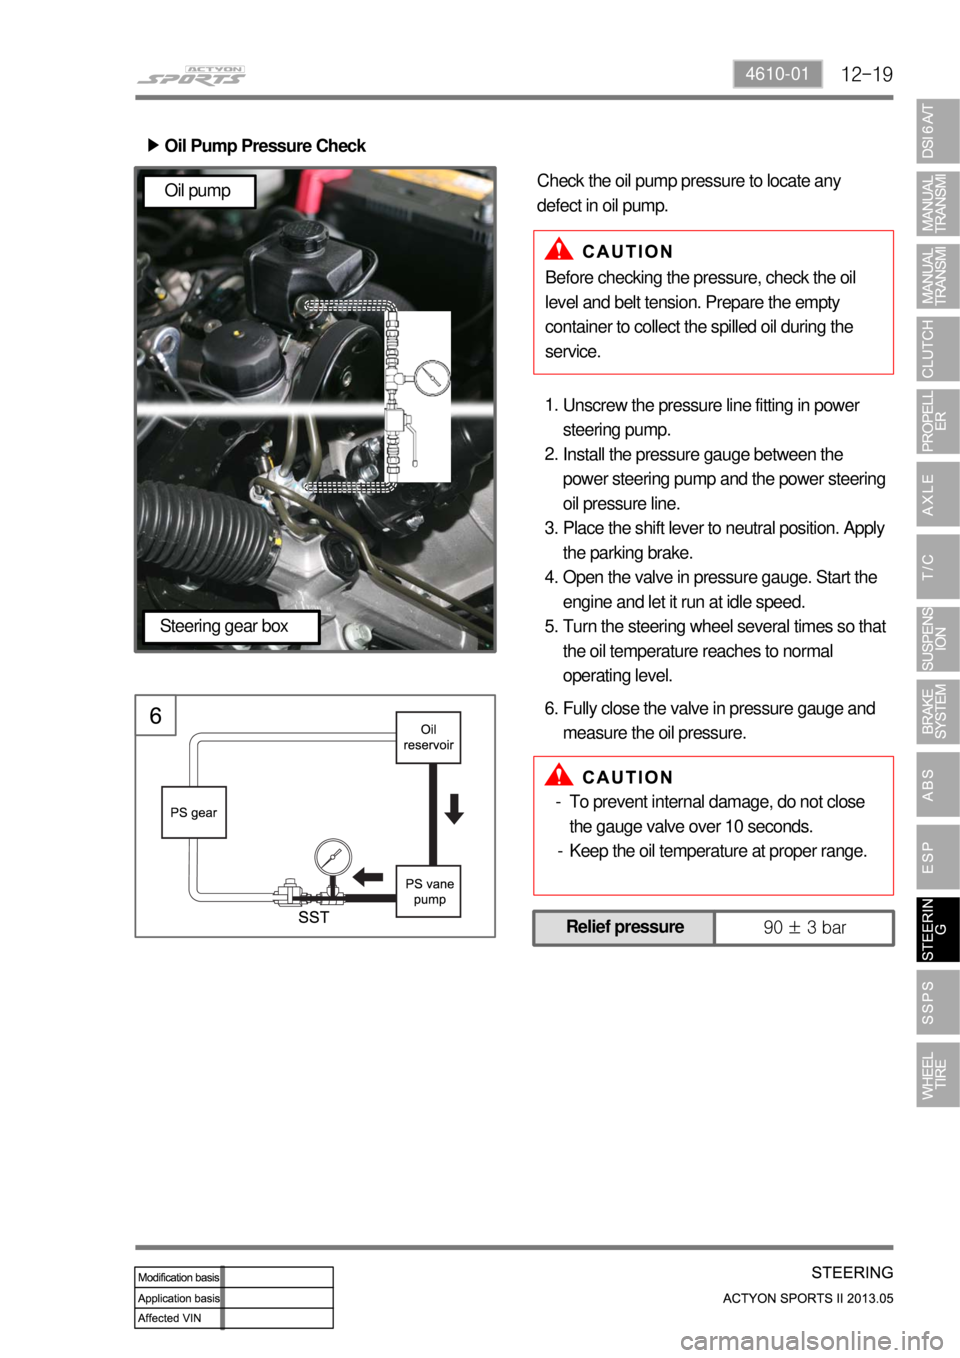 SSANGYONG NEW ACTYON SPORTS 2013 Owners Manual 12-194610-01
Oil Pump Pressure Check ▶
Unscrew the pressure line fitting in power 
steering pump.
Install the pressure gauge between the 
power steering pump and the power steering 
oil pressure lin